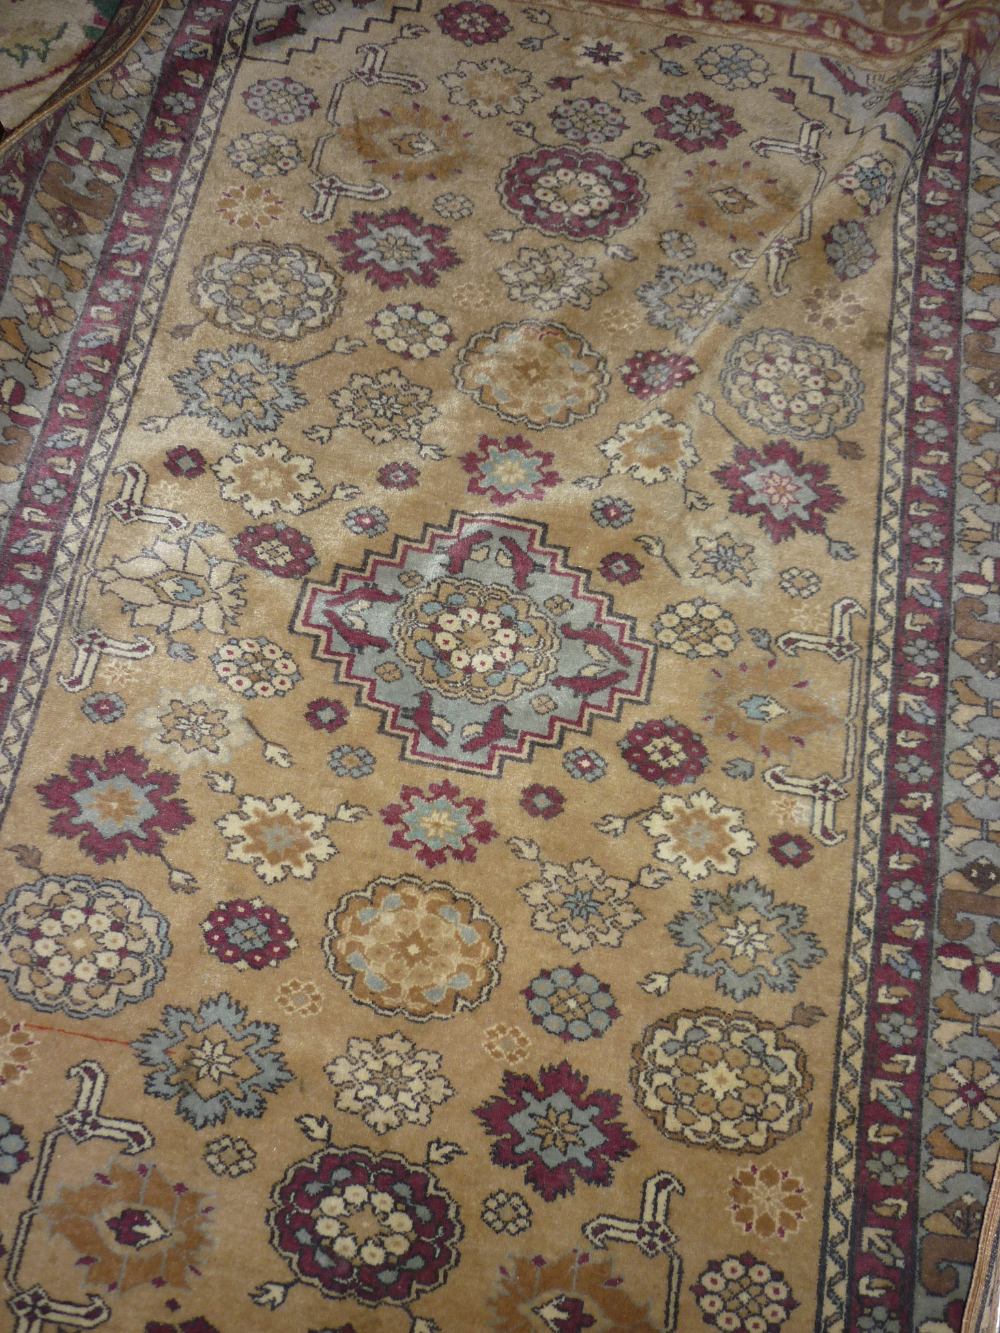 Indo Persian rug with an all-over rosette design in shades of claret and pale blue on a beige